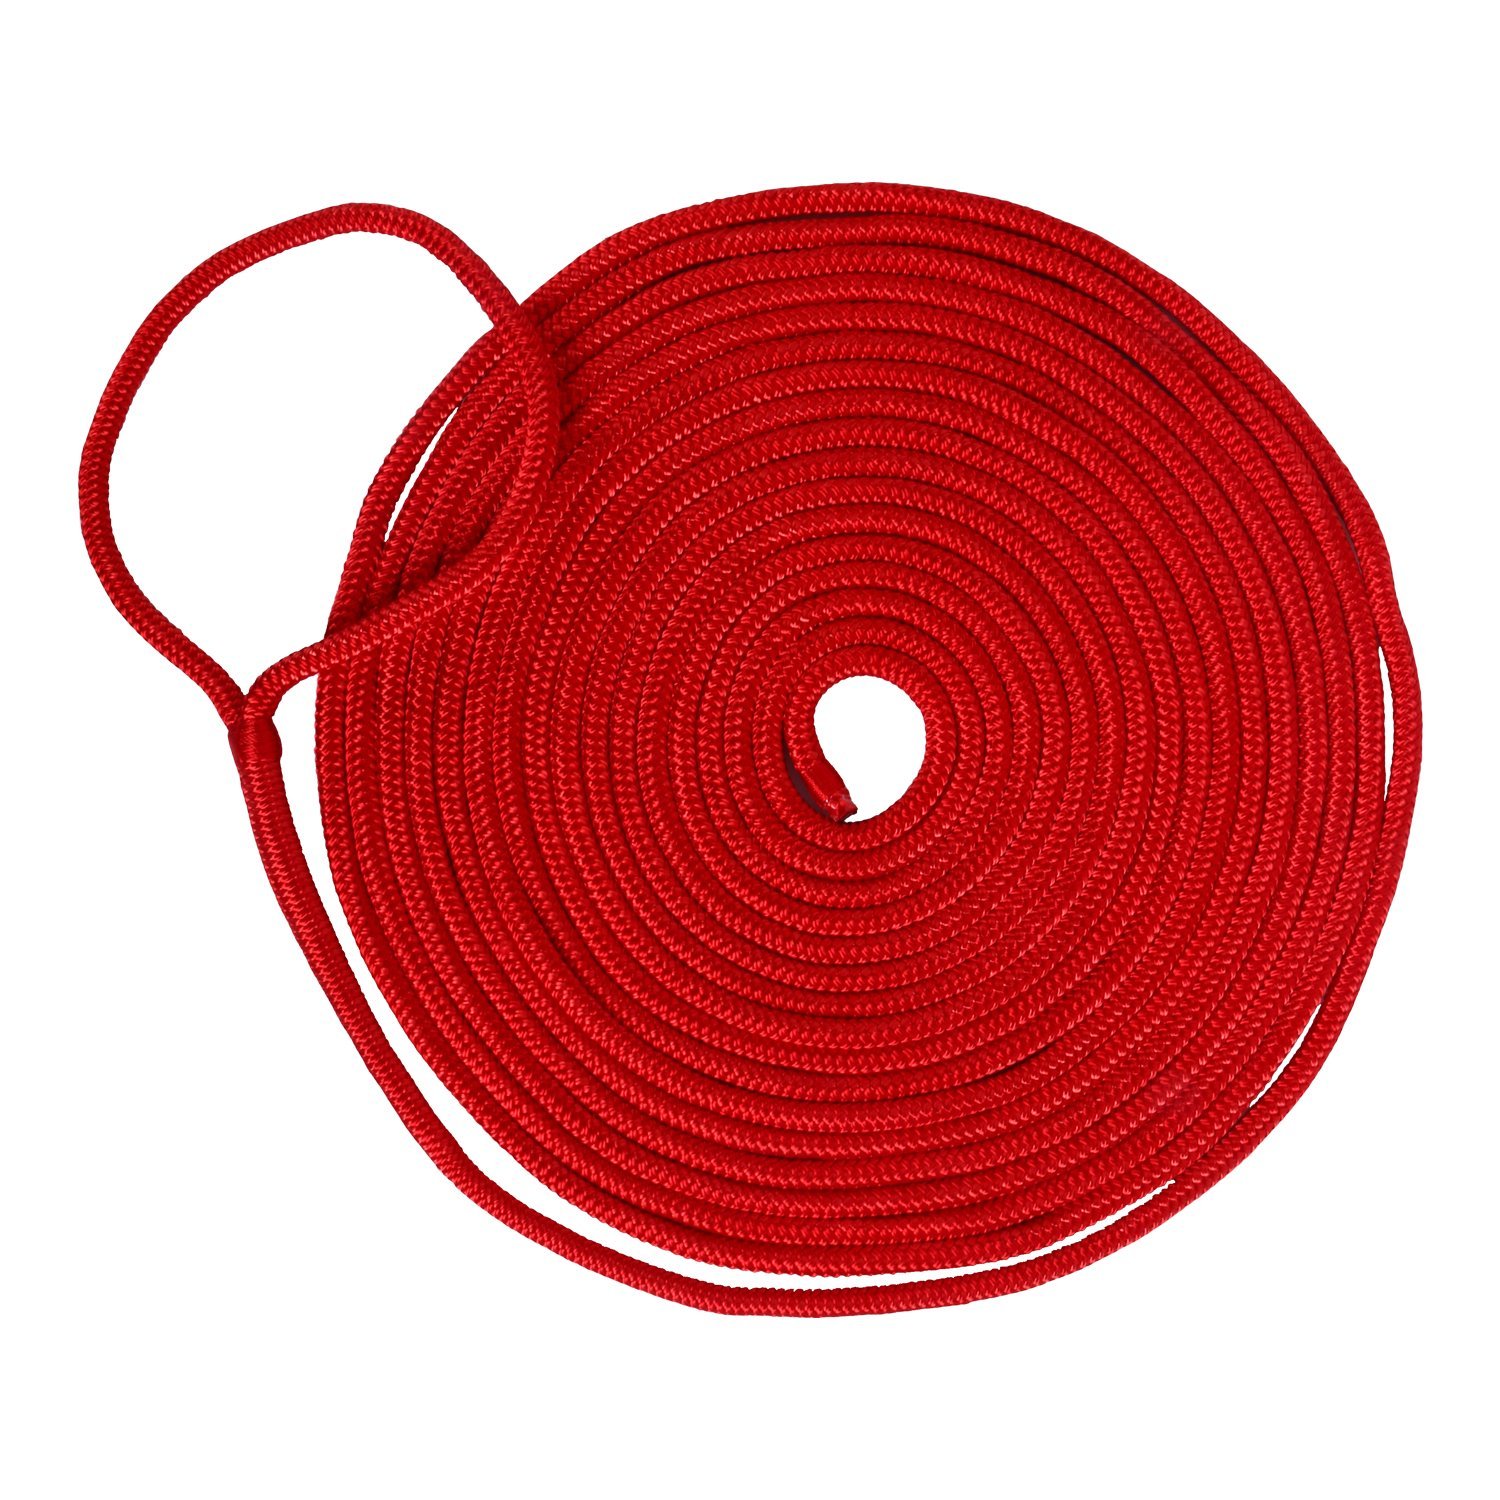 Amarine Made Multiple Size Double Braid Nylon Dock Line Mooring Rope Color Red 